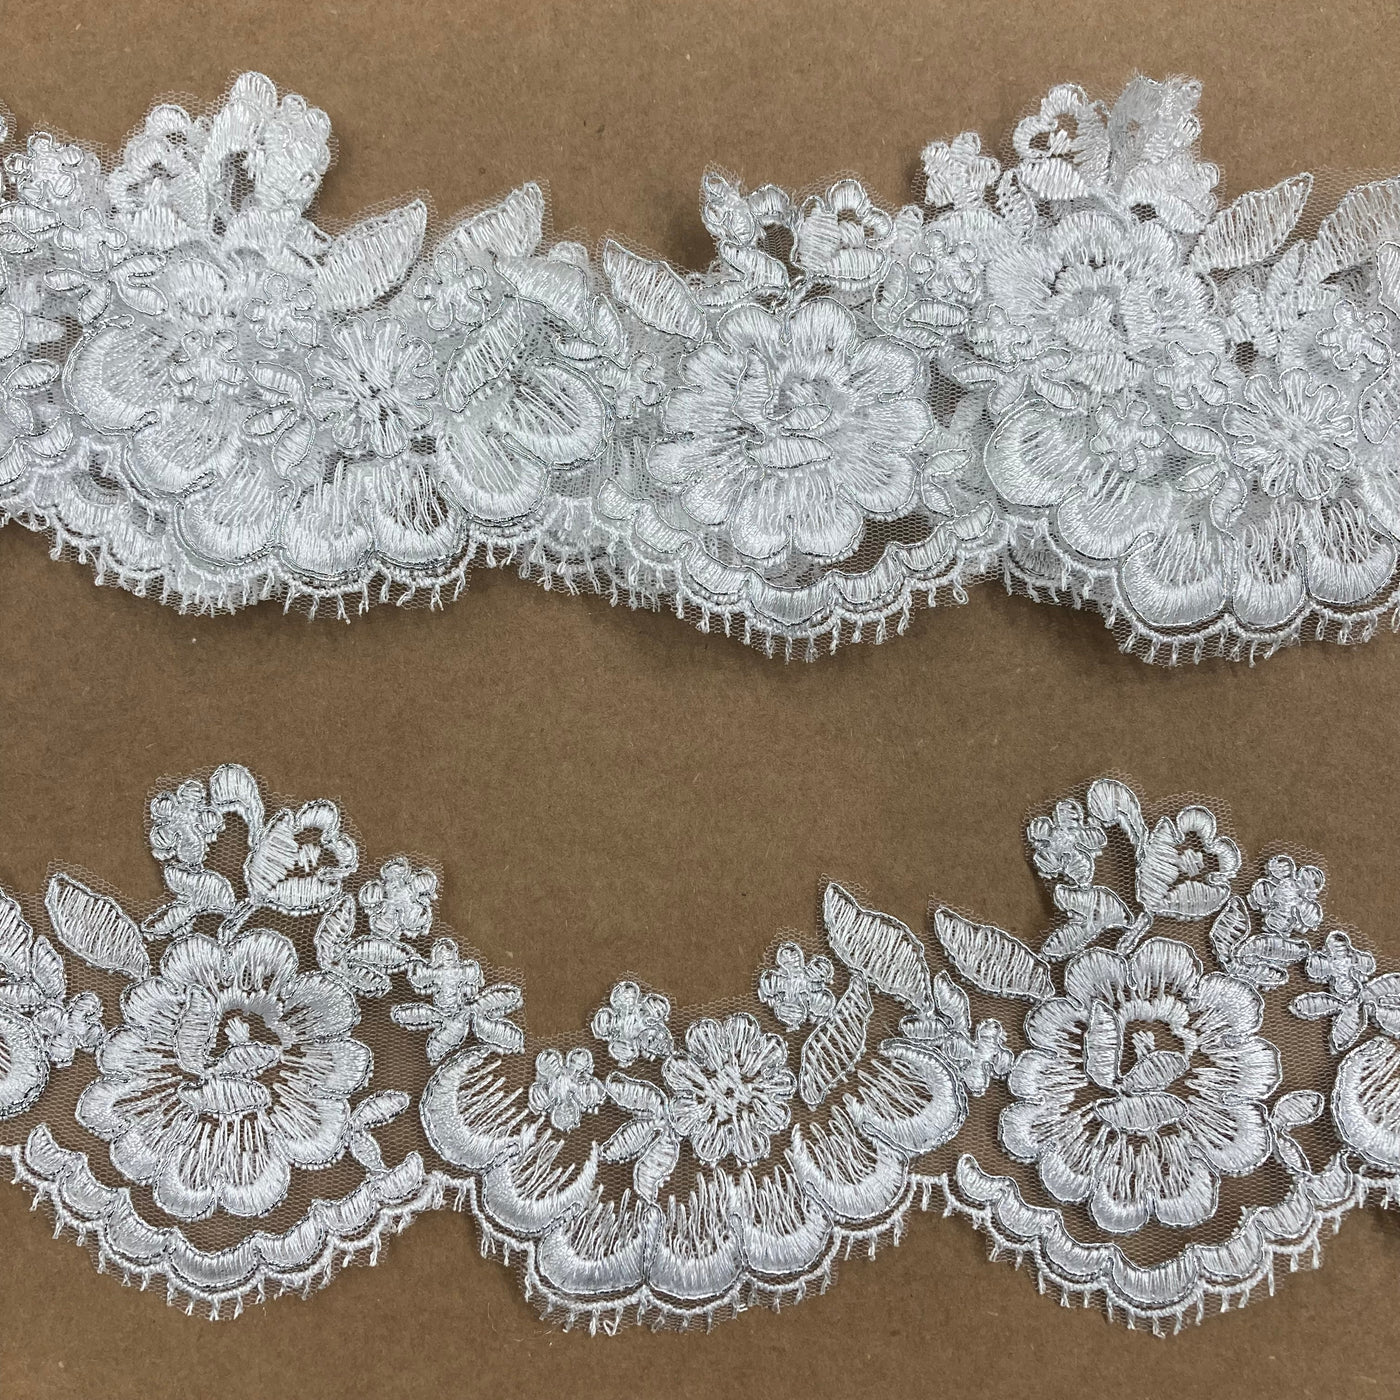 Corded White with Silver Trimming Embroidered on 100% Polyester Net Mesh. Lace Usa